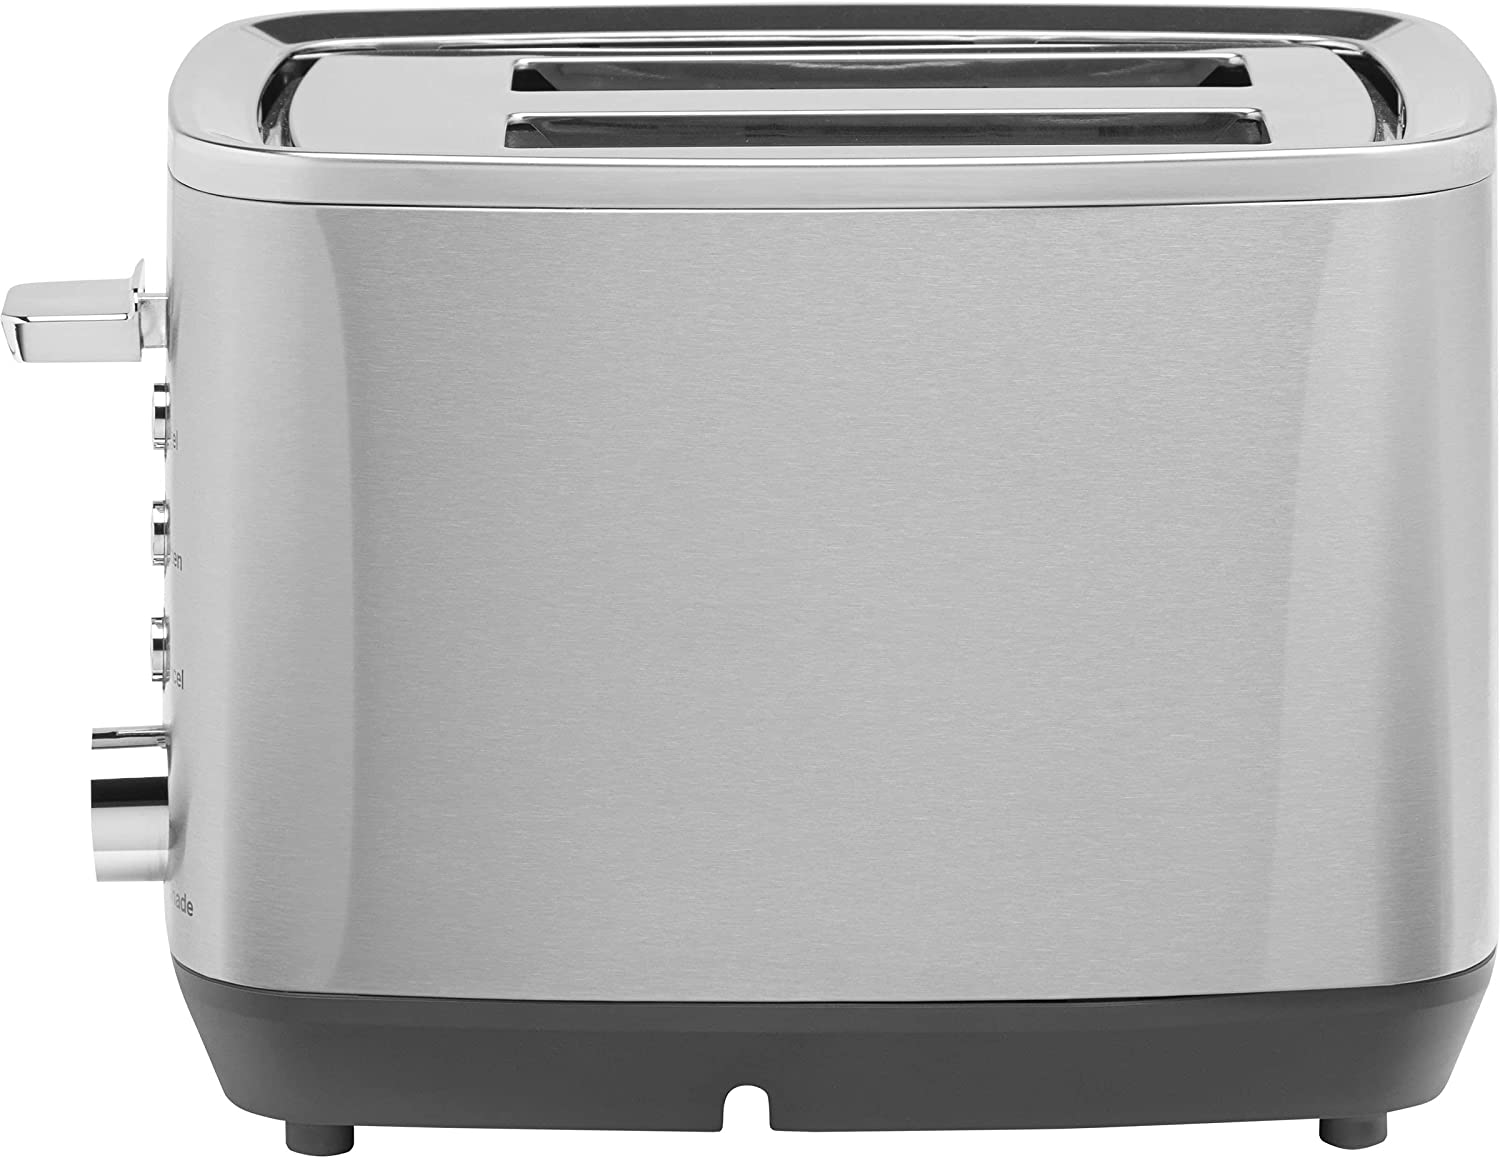 https://bigbigmart.com/wp-content/uploads/2023/05/GE-Stainless-Steel-Toaster-2-Slice-Extra-Wide-Slots-for-Toasting-Bagels-Breads-Waffles-More-7-Shade-Options-for-the-Entire-Household-to-Enjoy-Countertop-Kitchen-Essentials-850-Watts7.jpg